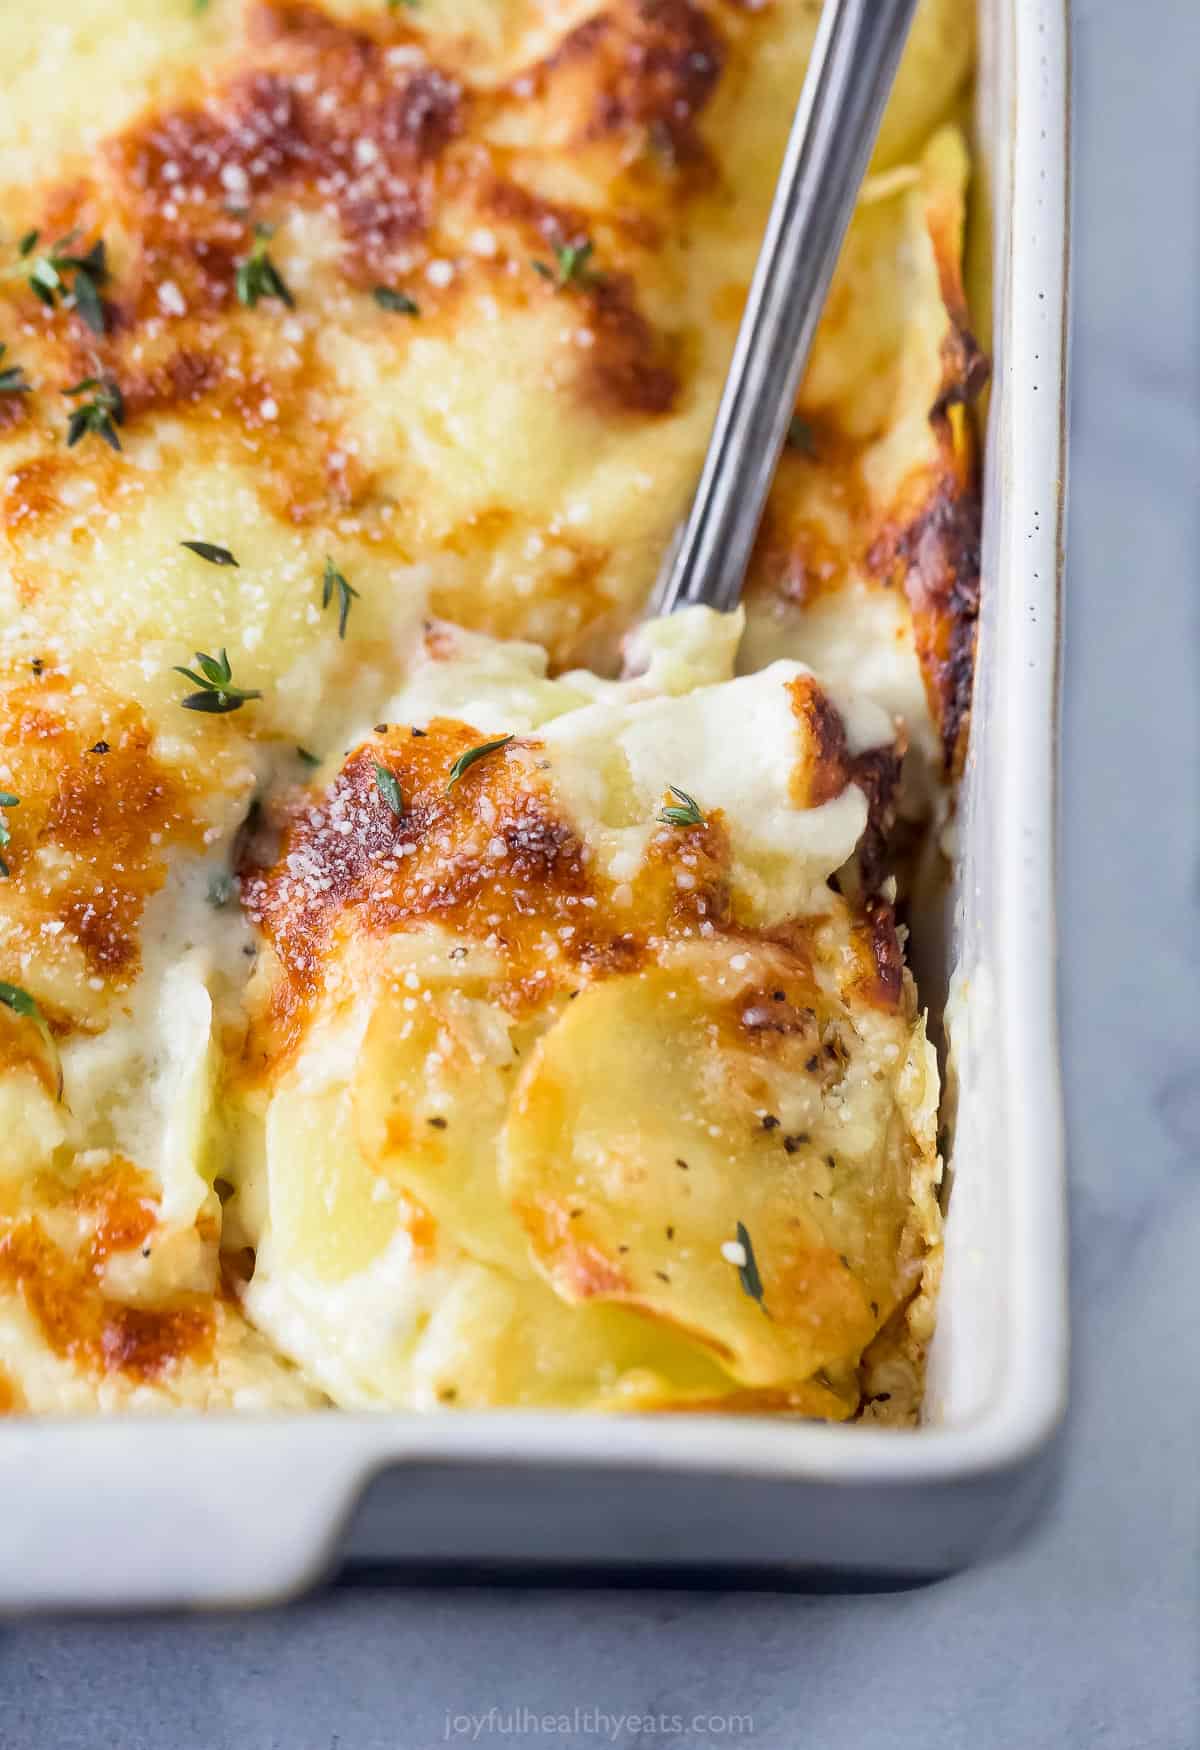 spoon scooping cheesy scalloped potatoes